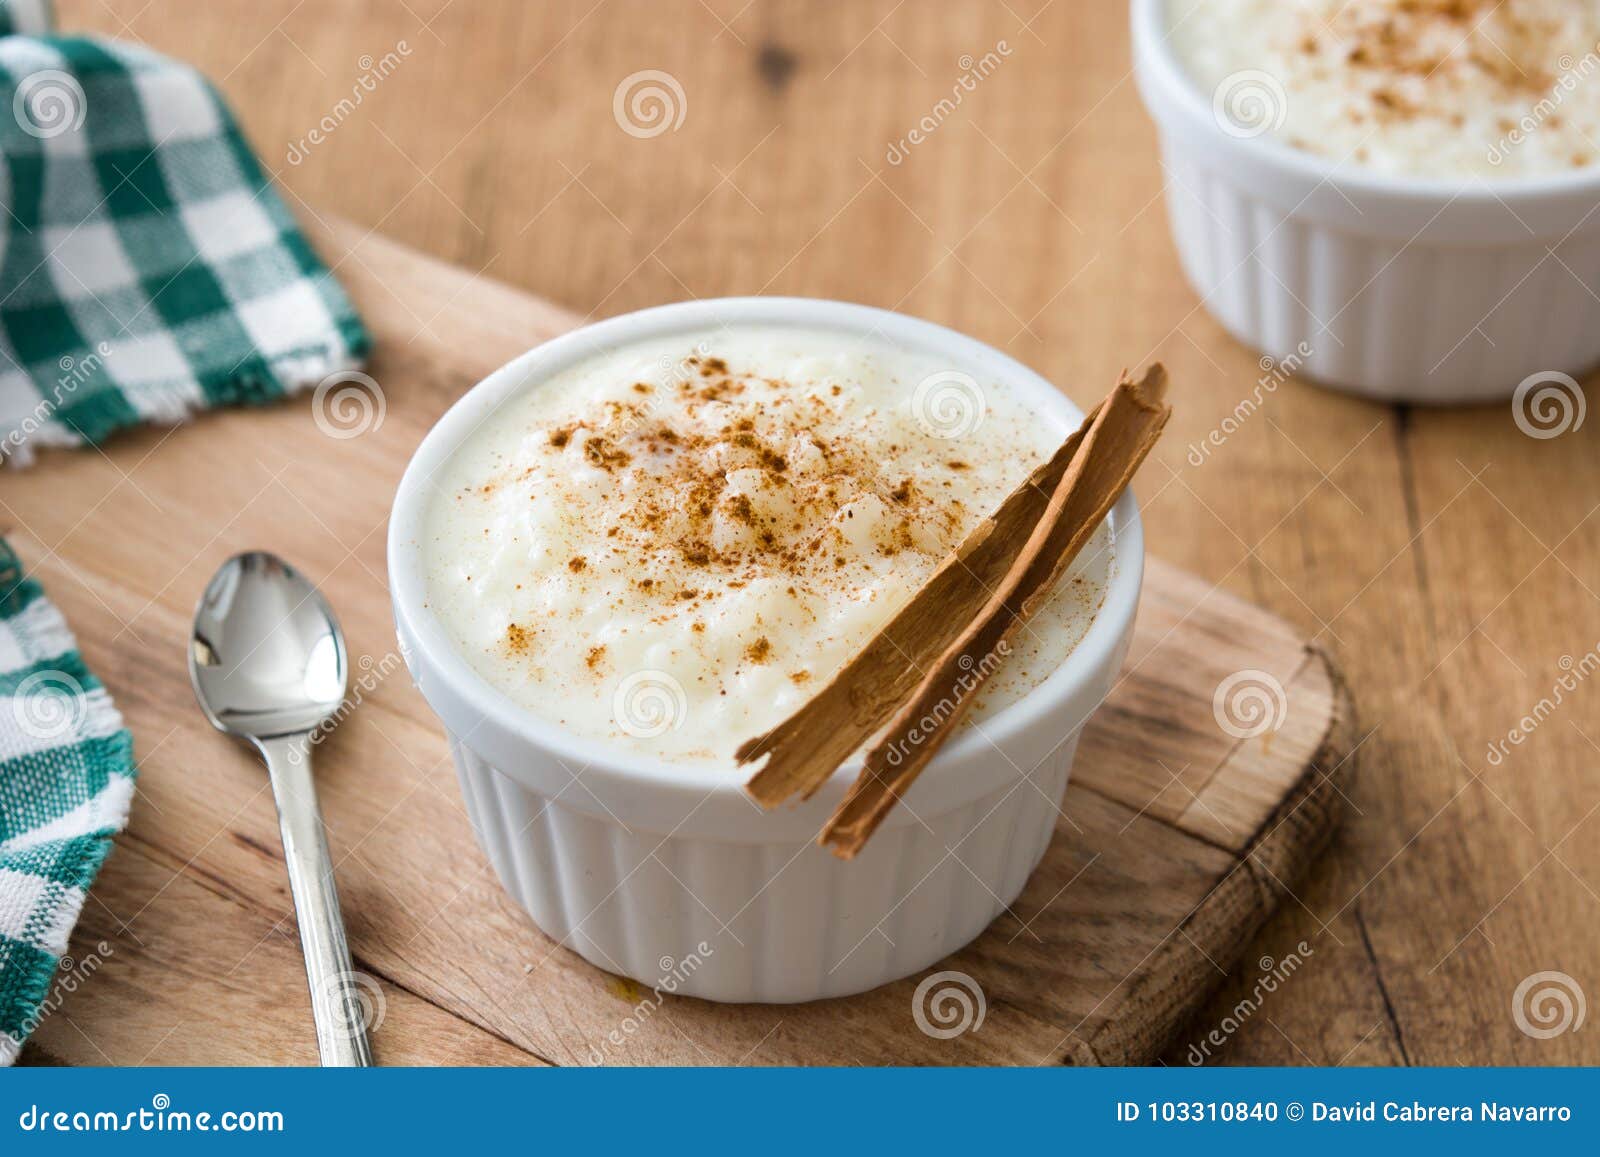 arroz con leche. rice pudding with cinnamon on wood